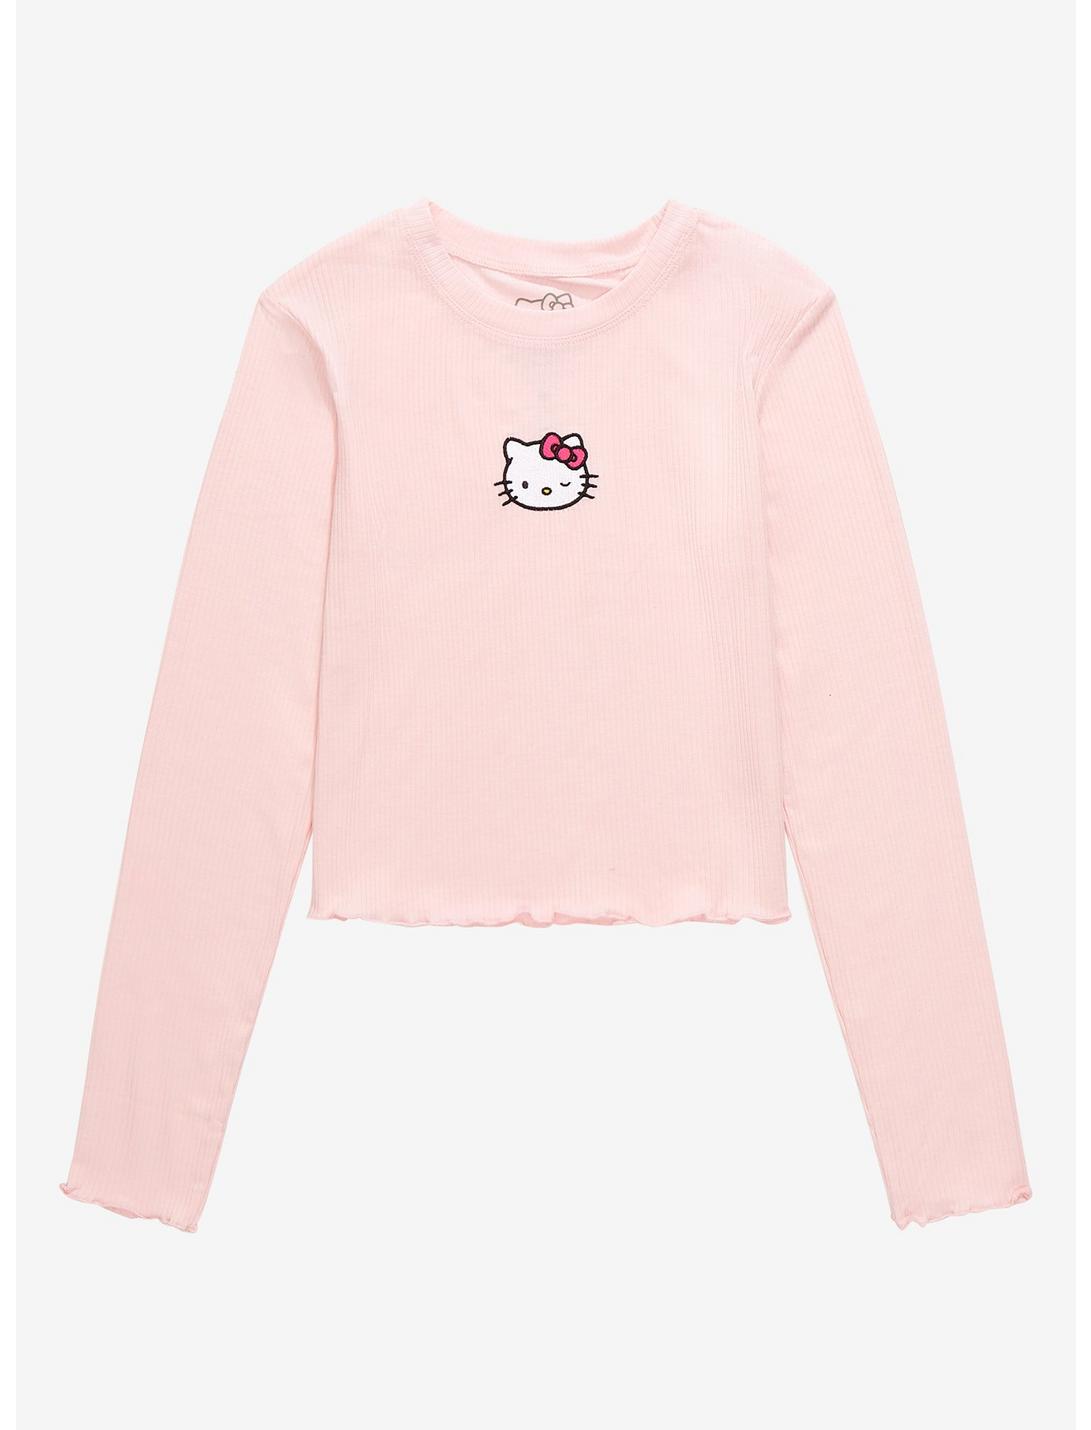 Sanrio Hello Kitty Winking Embroidered Women's Long Sleeve T-Shirt, LIGHT PINK, hi-res